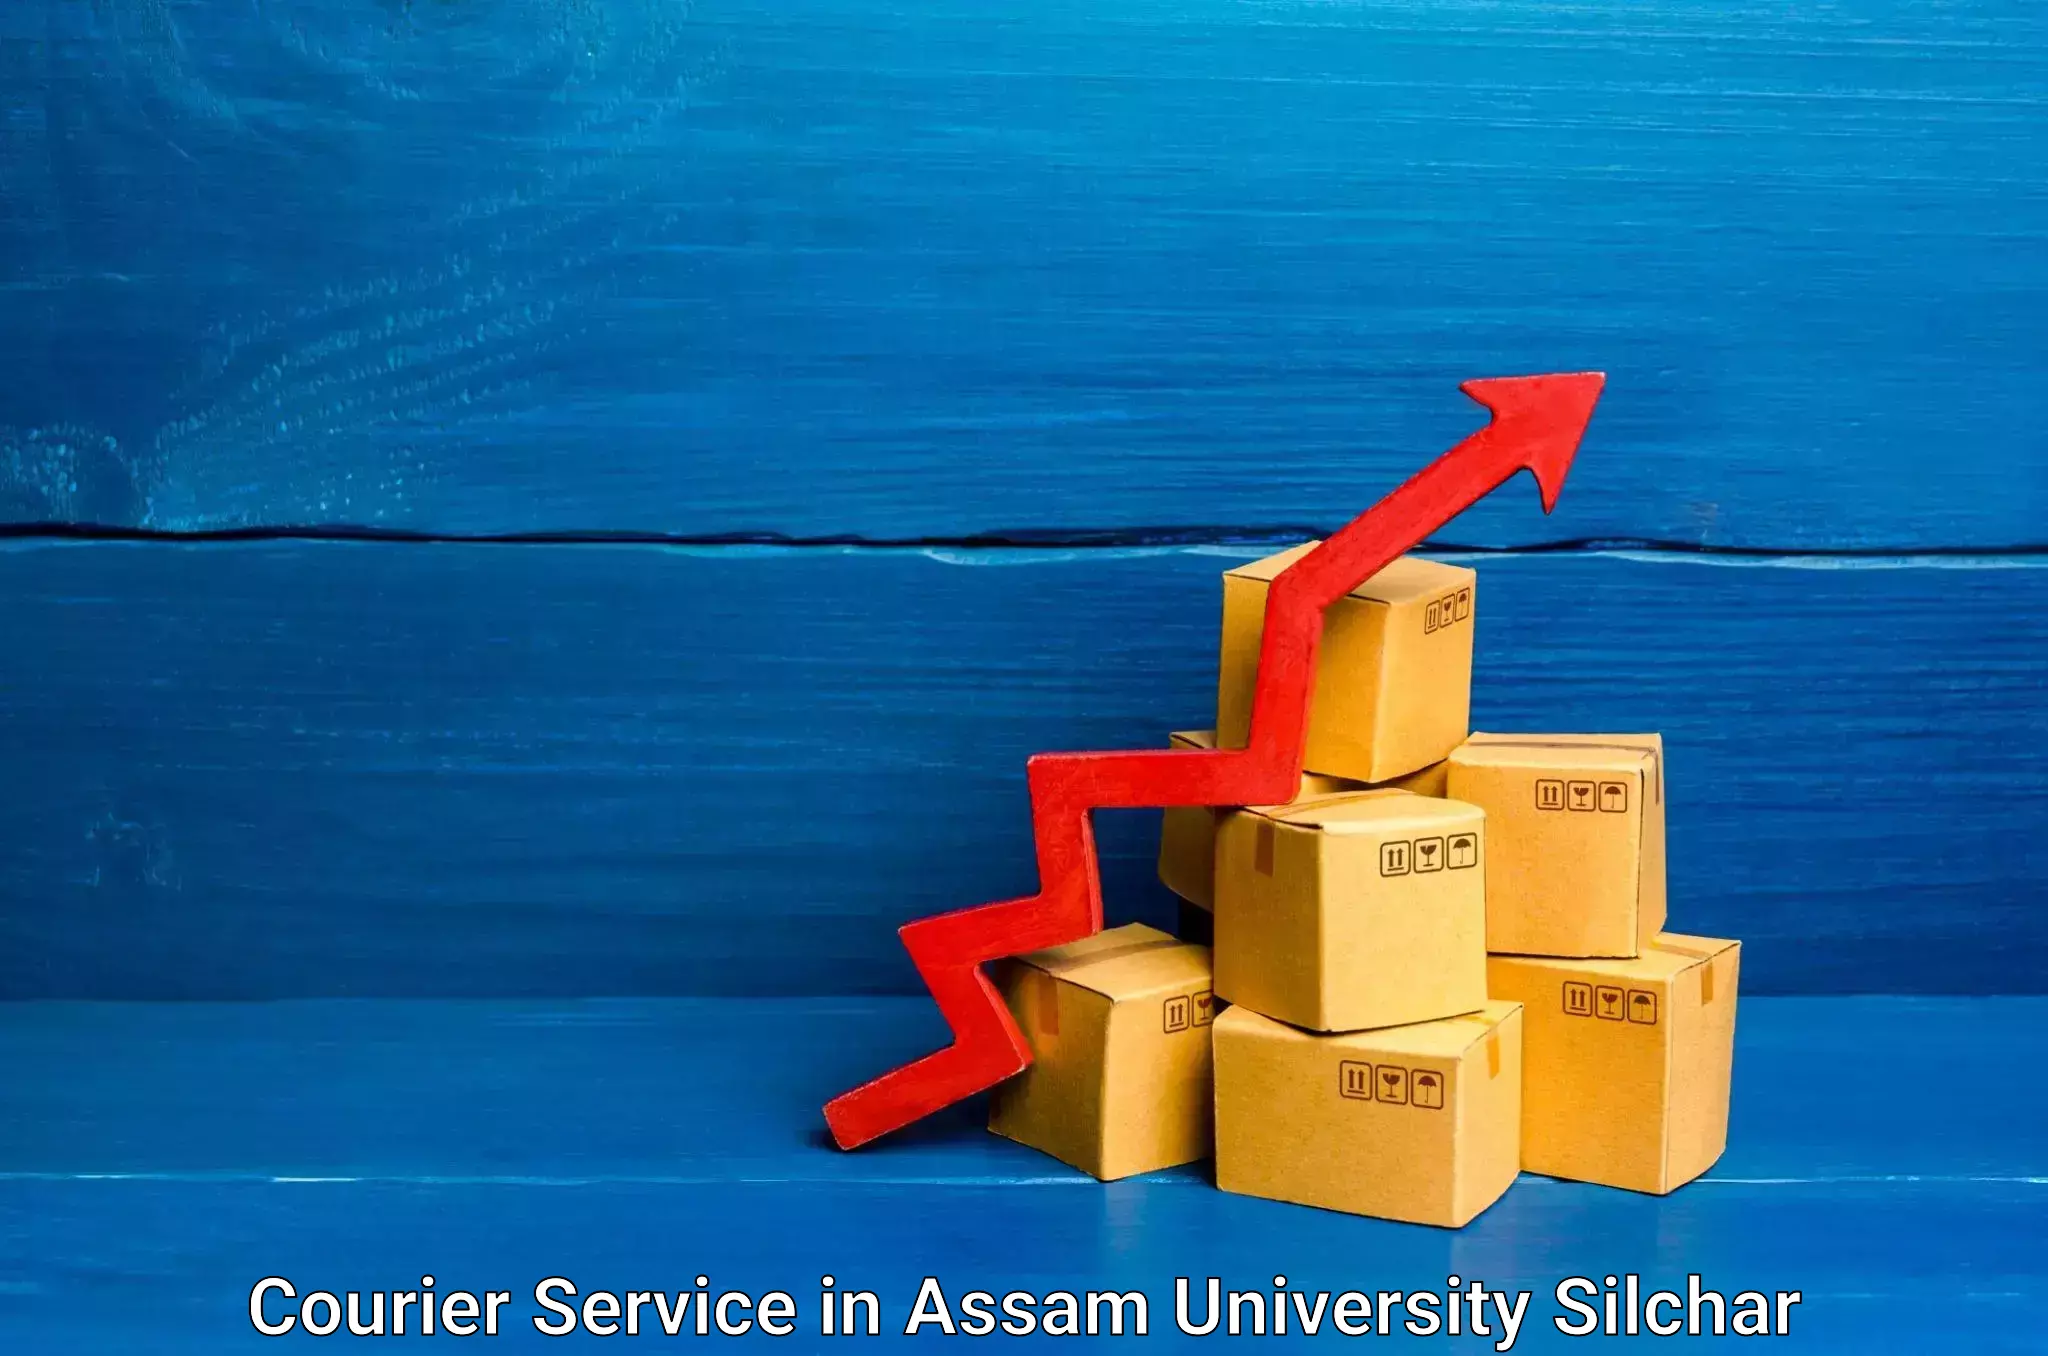 Sustainable delivery practices in Assam University Silchar